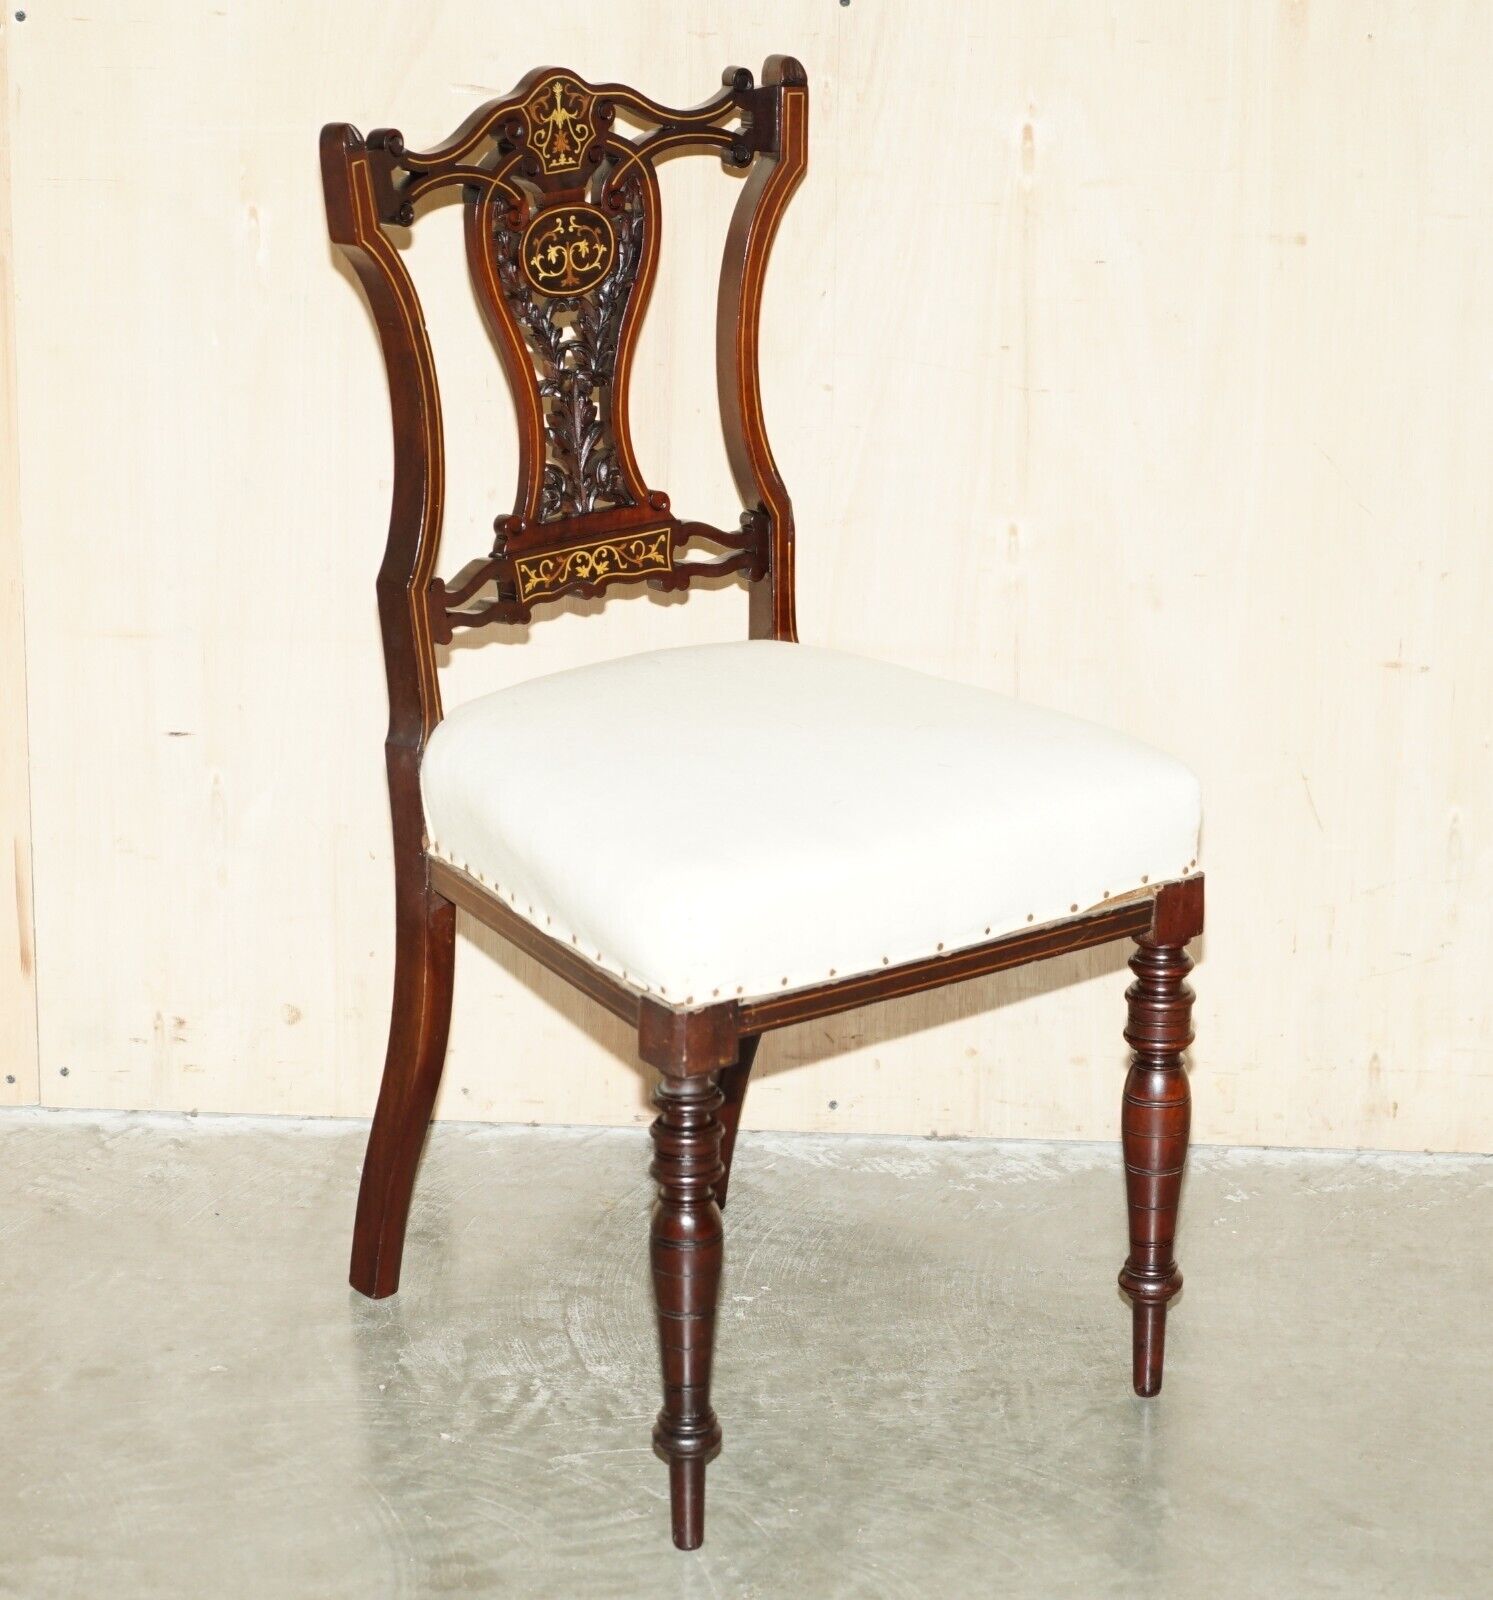 ANTIQUE VICTORIAN ROSEWOOD SALON CHAIR WITH STUNNING INLAID BACK PANEL